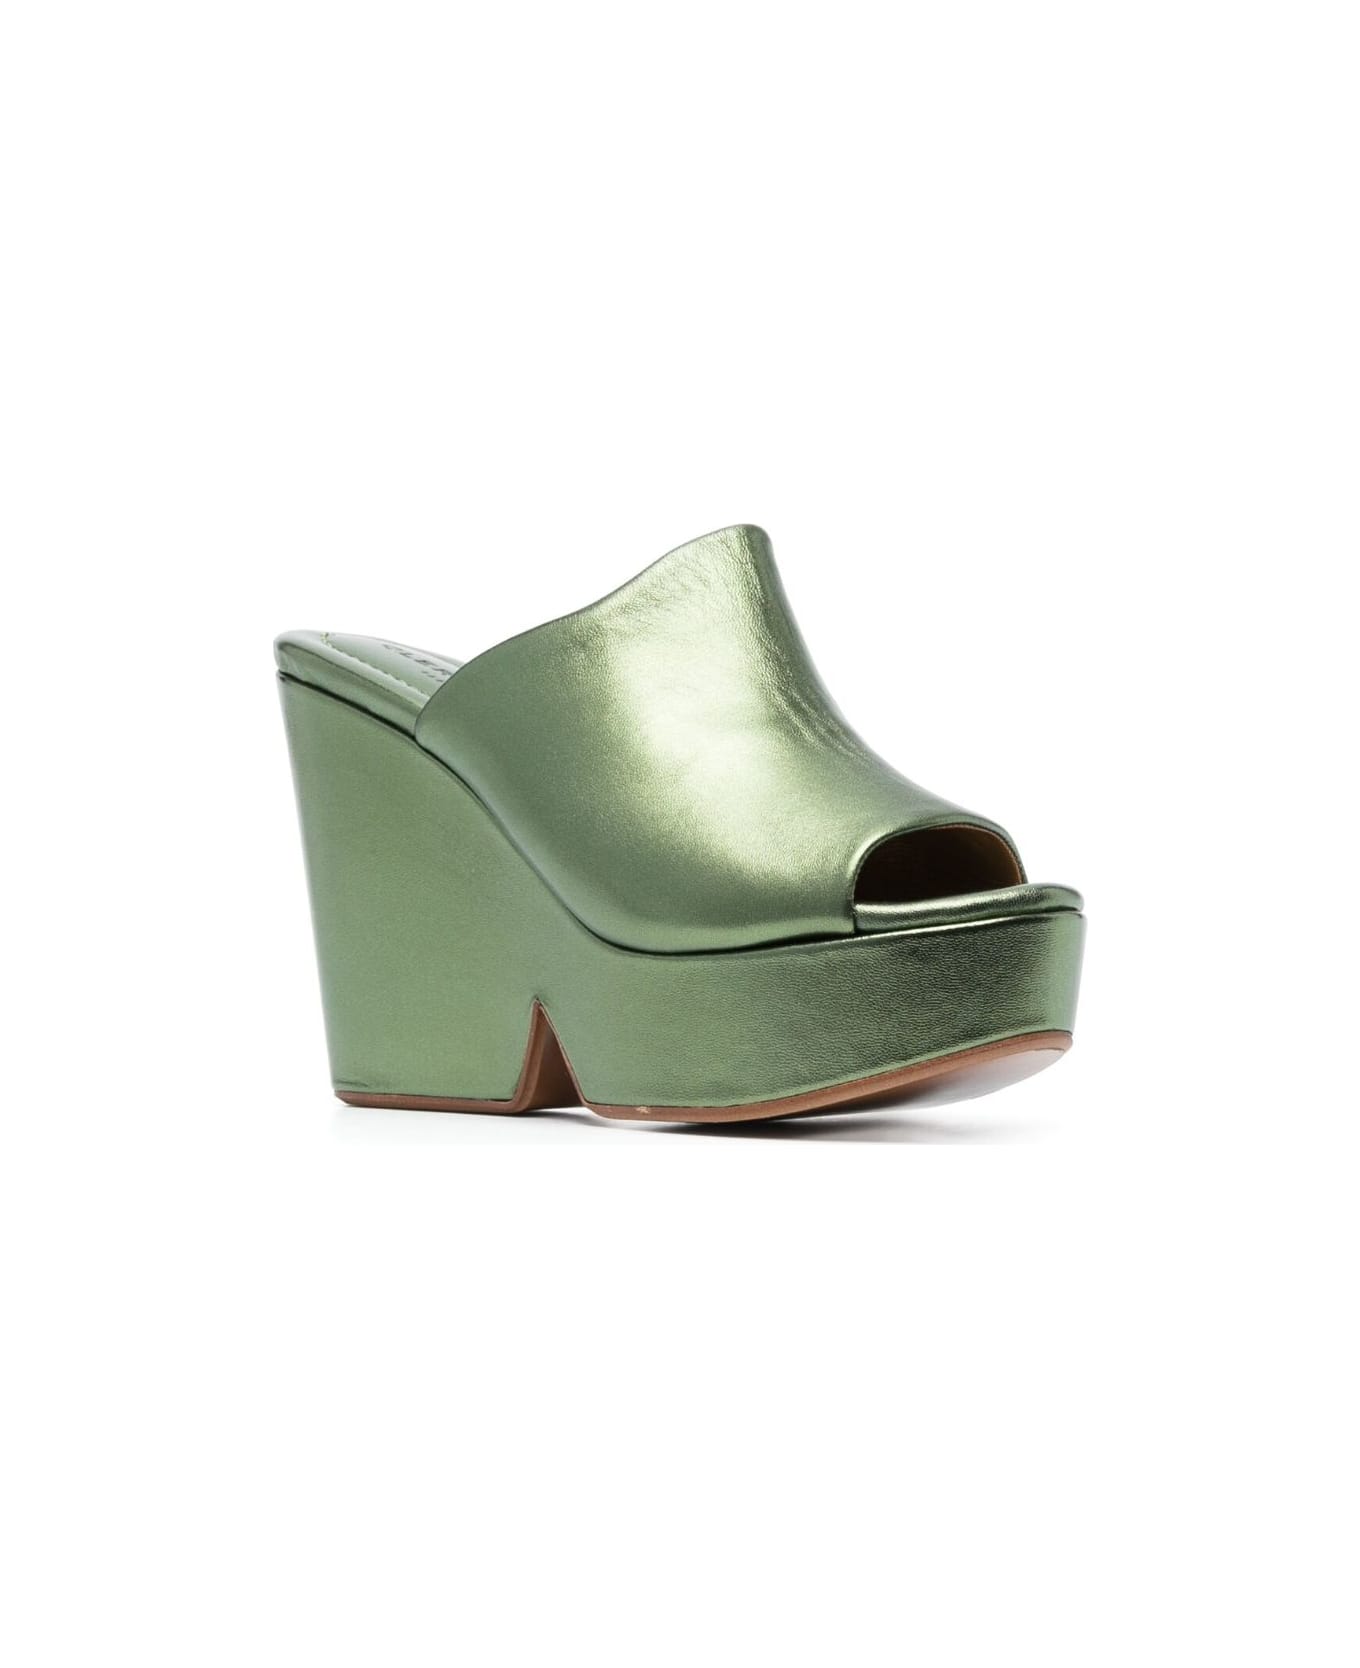 Clergerie Dolcy9 Sandals With Platform - Green サンダル